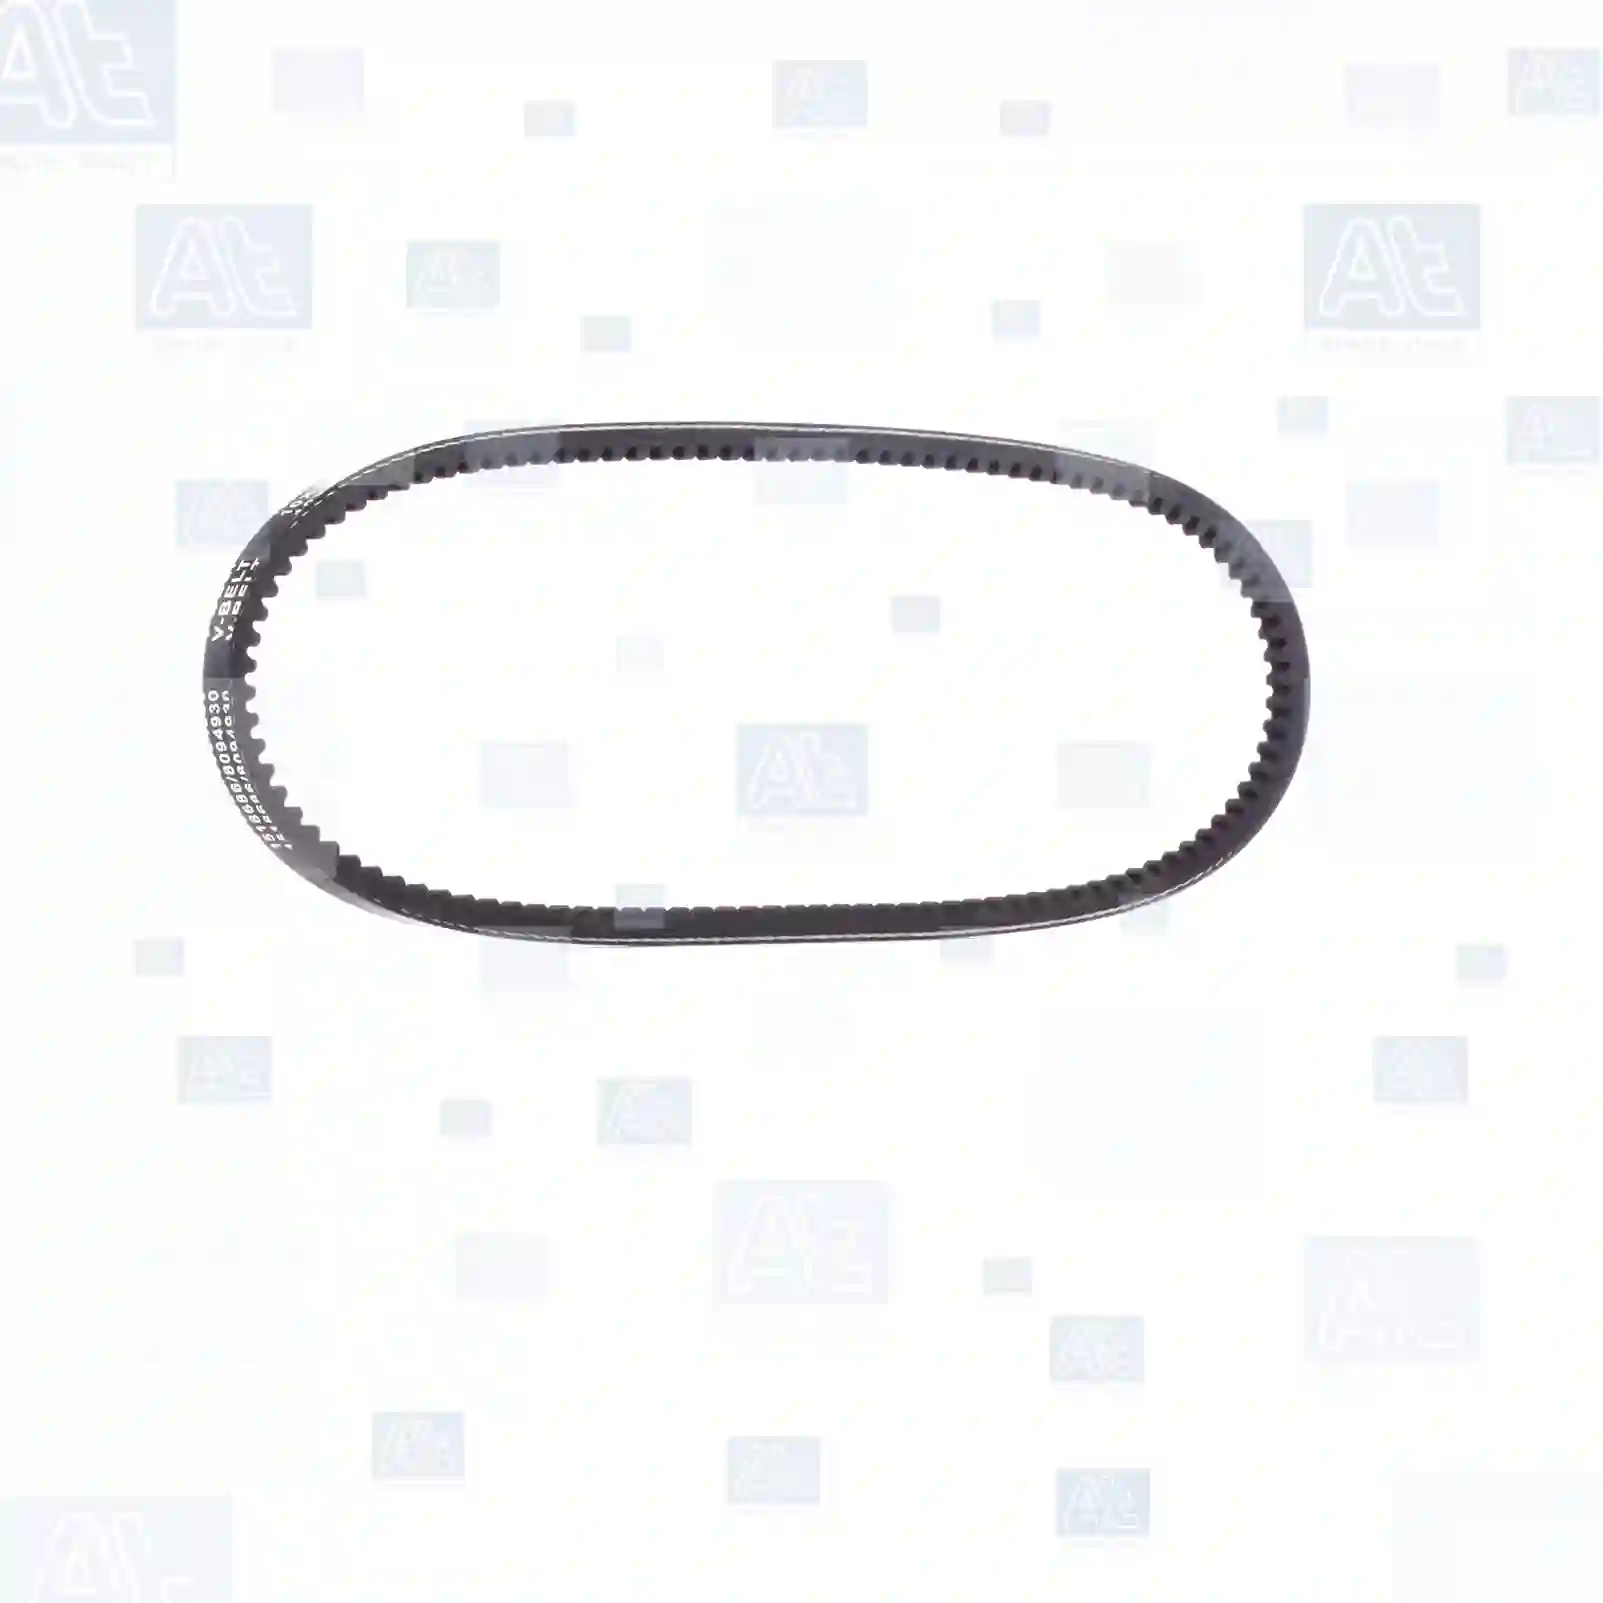 V-belt, at no 77707554, oem no: 167644, 167844, 007042, 0212253, 0212523, 0236636, 0237785, 0283164, 1289204, 212253, 212523, 236636, 237785, 283164, 603673, 547766, 771653, 773862, 42534783, 94482166, 8-94450395-0, 04645910, 04813541, 04818791, 42534783, 4631961, 4645910, 4645911, 4645913, 4759595, 4759597, 4813541, 4818791, 79028862, 98465830, 99439810, 06580460239, 06580462239, 0009978992, 0049971392, 0069979392, 007753012520, 007753012554, 0109973692, MH014033, 02117-43523, 02117-45523, 167644, 167844, 5000250769, 188205, 814204, 5000686286, 167644, 167844, 188205, 814204, 1136713010, 950373, 950375, 967199, 977322, ZG02331-0008 At Spare Part | Engine, Accelerator Pedal, Camshaft, Connecting Rod, Crankcase, Crankshaft, Cylinder Head, Engine Suspension Mountings, Exhaust Manifold, Exhaust Gas Recirculation, Filter Kits, Flywheel Housing, General Overhaul Kits, Engine, Intake Manifold, Oil Cleaner, Oil Cooler, Oil Filter, Oil Pump, Oil Sump, Piston & Liner, Sensor & Switch, Timing Case, Turbocharger, Cooling System, Belt Tensioner, Coolant Filter, Coolant Pipe, Corrosion Prevention Agent, Drive, Expansion Tank, Fan, Intercooler, Monitors & Gauges, Radiator, Thermostat, V-Belt / Timing belt, Water Pump, Fuel System, Electronical Injector Unit, Feed Pump, Fuel Filter, cpl., Fuel Gauge Sender,  Fuel Line, Fuel Pump, Fuel Tank, Injection Line Kit, Injection Pump, Exhaust System, Clutch & Pedal, Gearbox, Propeller Shaft, Axles, Brake System, Hubs & Wheels, Suspension, Leaf Spring, Universal Parts / Accessories, Steering, Electrical System, Cabin V-belt, at no 77707554, oem no: 167644, 167844, 007042, 0212253, 0212523, 0236636, 0237785, 0283164, 1289204, 212253, 212523, 236636, 237785, 283164, 603673, 547766, 771653, 773862, 42534783, 94482166, 8-94450395-0, 04645910, 04813541, 04818791, 42534783, 4631961, 4645910, 4645911, 4645913, 4759595, 4759597, 4813541, 4818791, 79028862, 98465830, 99439810, 06580460239, 06580462239, 0009978992, 0049971392, 0069979392, 007753012520, 007753012554, 0109973692, MH014033, 02117-43523, 02117-45523, 167644, 167844, 5000250769, 188205, 814204, 5000686286, 167644, 167844, 188205, 814204, 1136713010, 950373, 950375, 967199, 977322, ZG02331-0008 At Spare Part | Engine, Accelerator Pedal, Camshaft, Connecting Rod, Crankcase, Crankshaft, Cylinder Head, Engine Suspension Mountings, Exhaust Manifold, Exhaust Gas Recirculation, Filter Kits, Flywheel Housing, General Overhaul Kits, Engine, Intake Manifold, Oil Cleaner, Oil Cooler, Oil Filter, Oil Pump, Oil Sump, Piston & Liner, Sensor & Switch, Timing Case, Turbocharger, Cooling System, Belt Tensioner, Coolant Filter, Coolant Pipe, Corrosion Prevention Agent, Drive, Expansion Tank, Fan, Intercooler, Monitors & Gauges, Radiator, Thermostat, V-Belt / Timing belt, Water Pump, Fuel System, Electronical Injector Unit, Feed Pump, Fuel Filter, cpl., Fuel Gauge Sender,  Fuel Line, Fuel Pump, Fuel Tank, Injection Line Kit, Injection Pump, Exhaust System, Clutch & Pedal, Gearbox, Propeller Shaft, Axles, Brake System, Hubs & Wheels, Suspension, Leaf Spring, Universal Parts / Accessories, Steering, Electrical System, Cabin